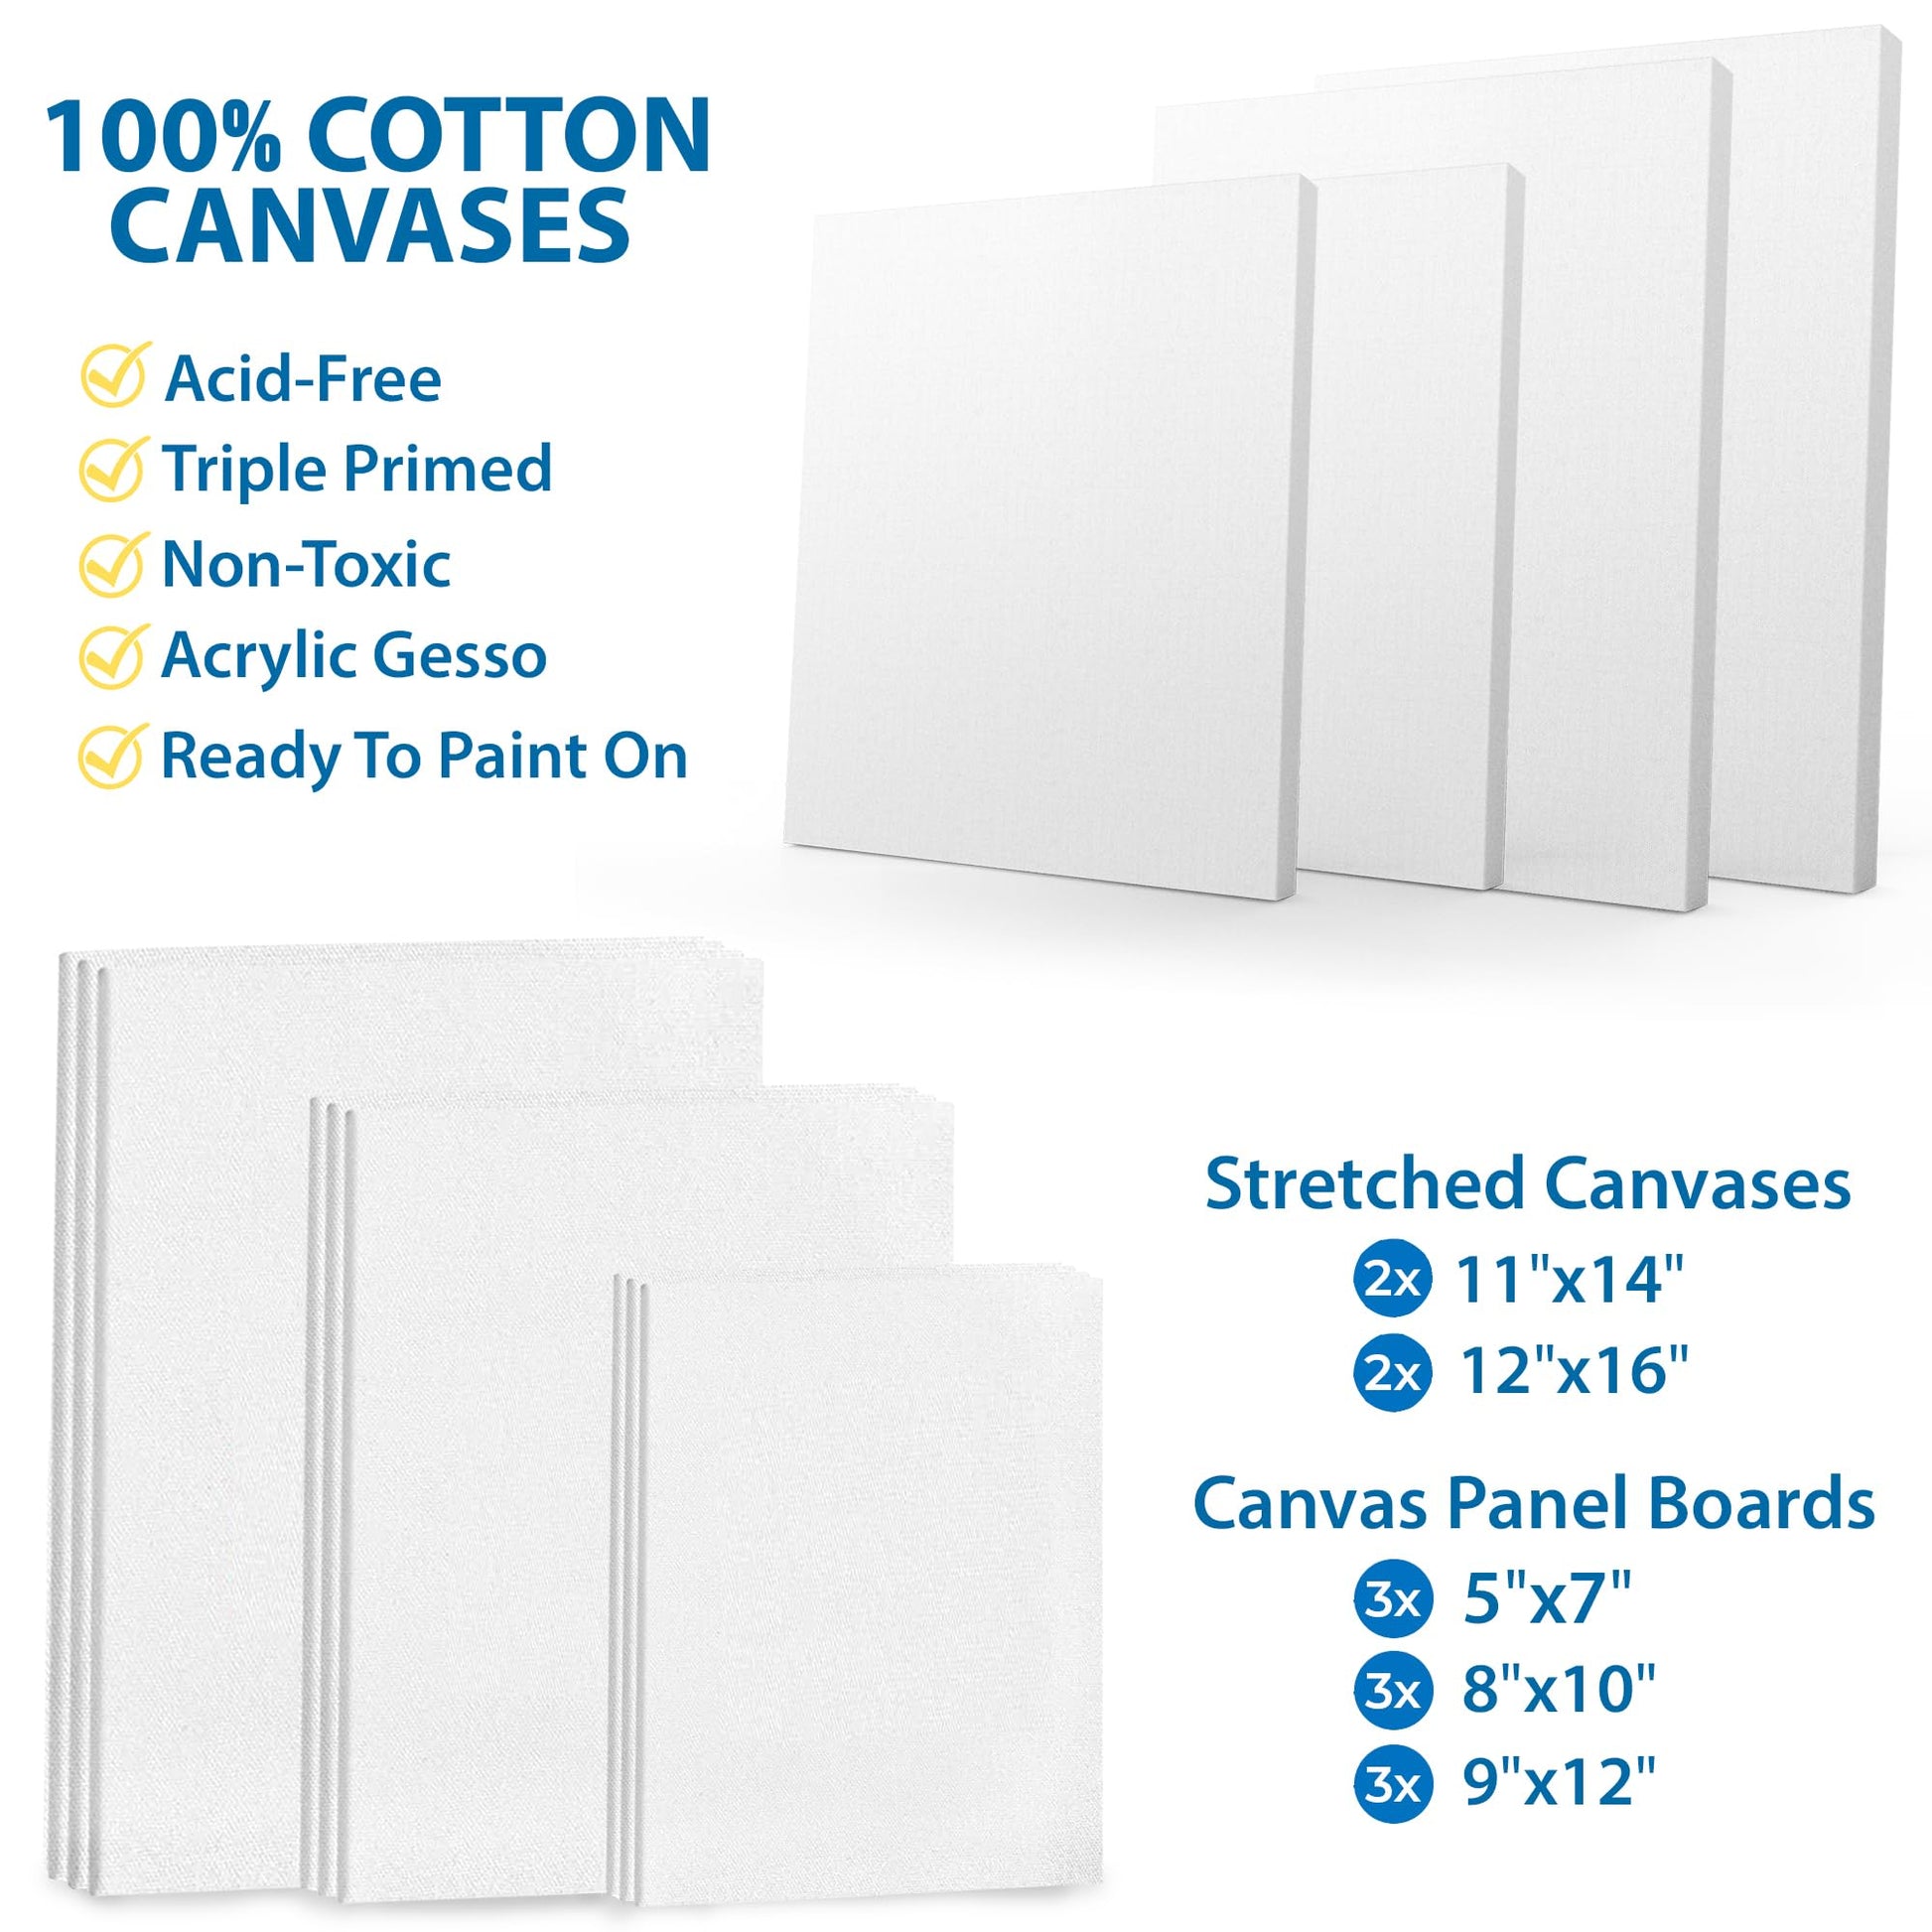 KEFF Canvases for Painting - 24 Pack Art Paint Canvas Panels Set Boards -  5x7, 8x10, 9x12, 11x14 Inches 100% Cotton Primed Painting Supplies for  Acrylic, Oil, Tempera & Watercolor Paint